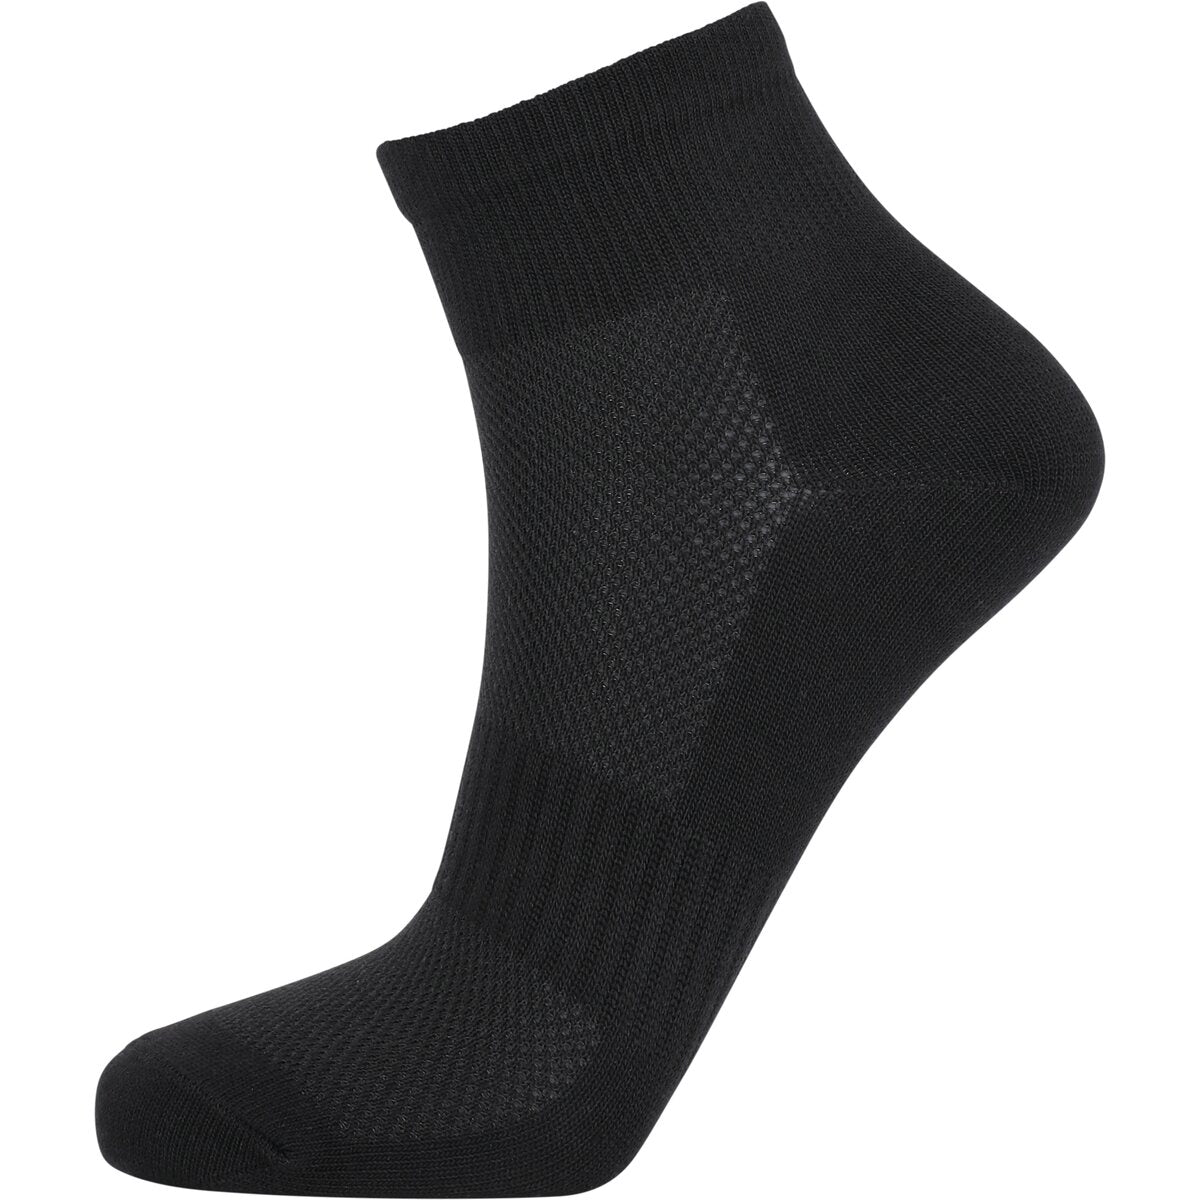 Athlecia Comfort-Mesh Sustainable Quarter Cut Sock 3-Pack - Black 1 Shaws Department Stores